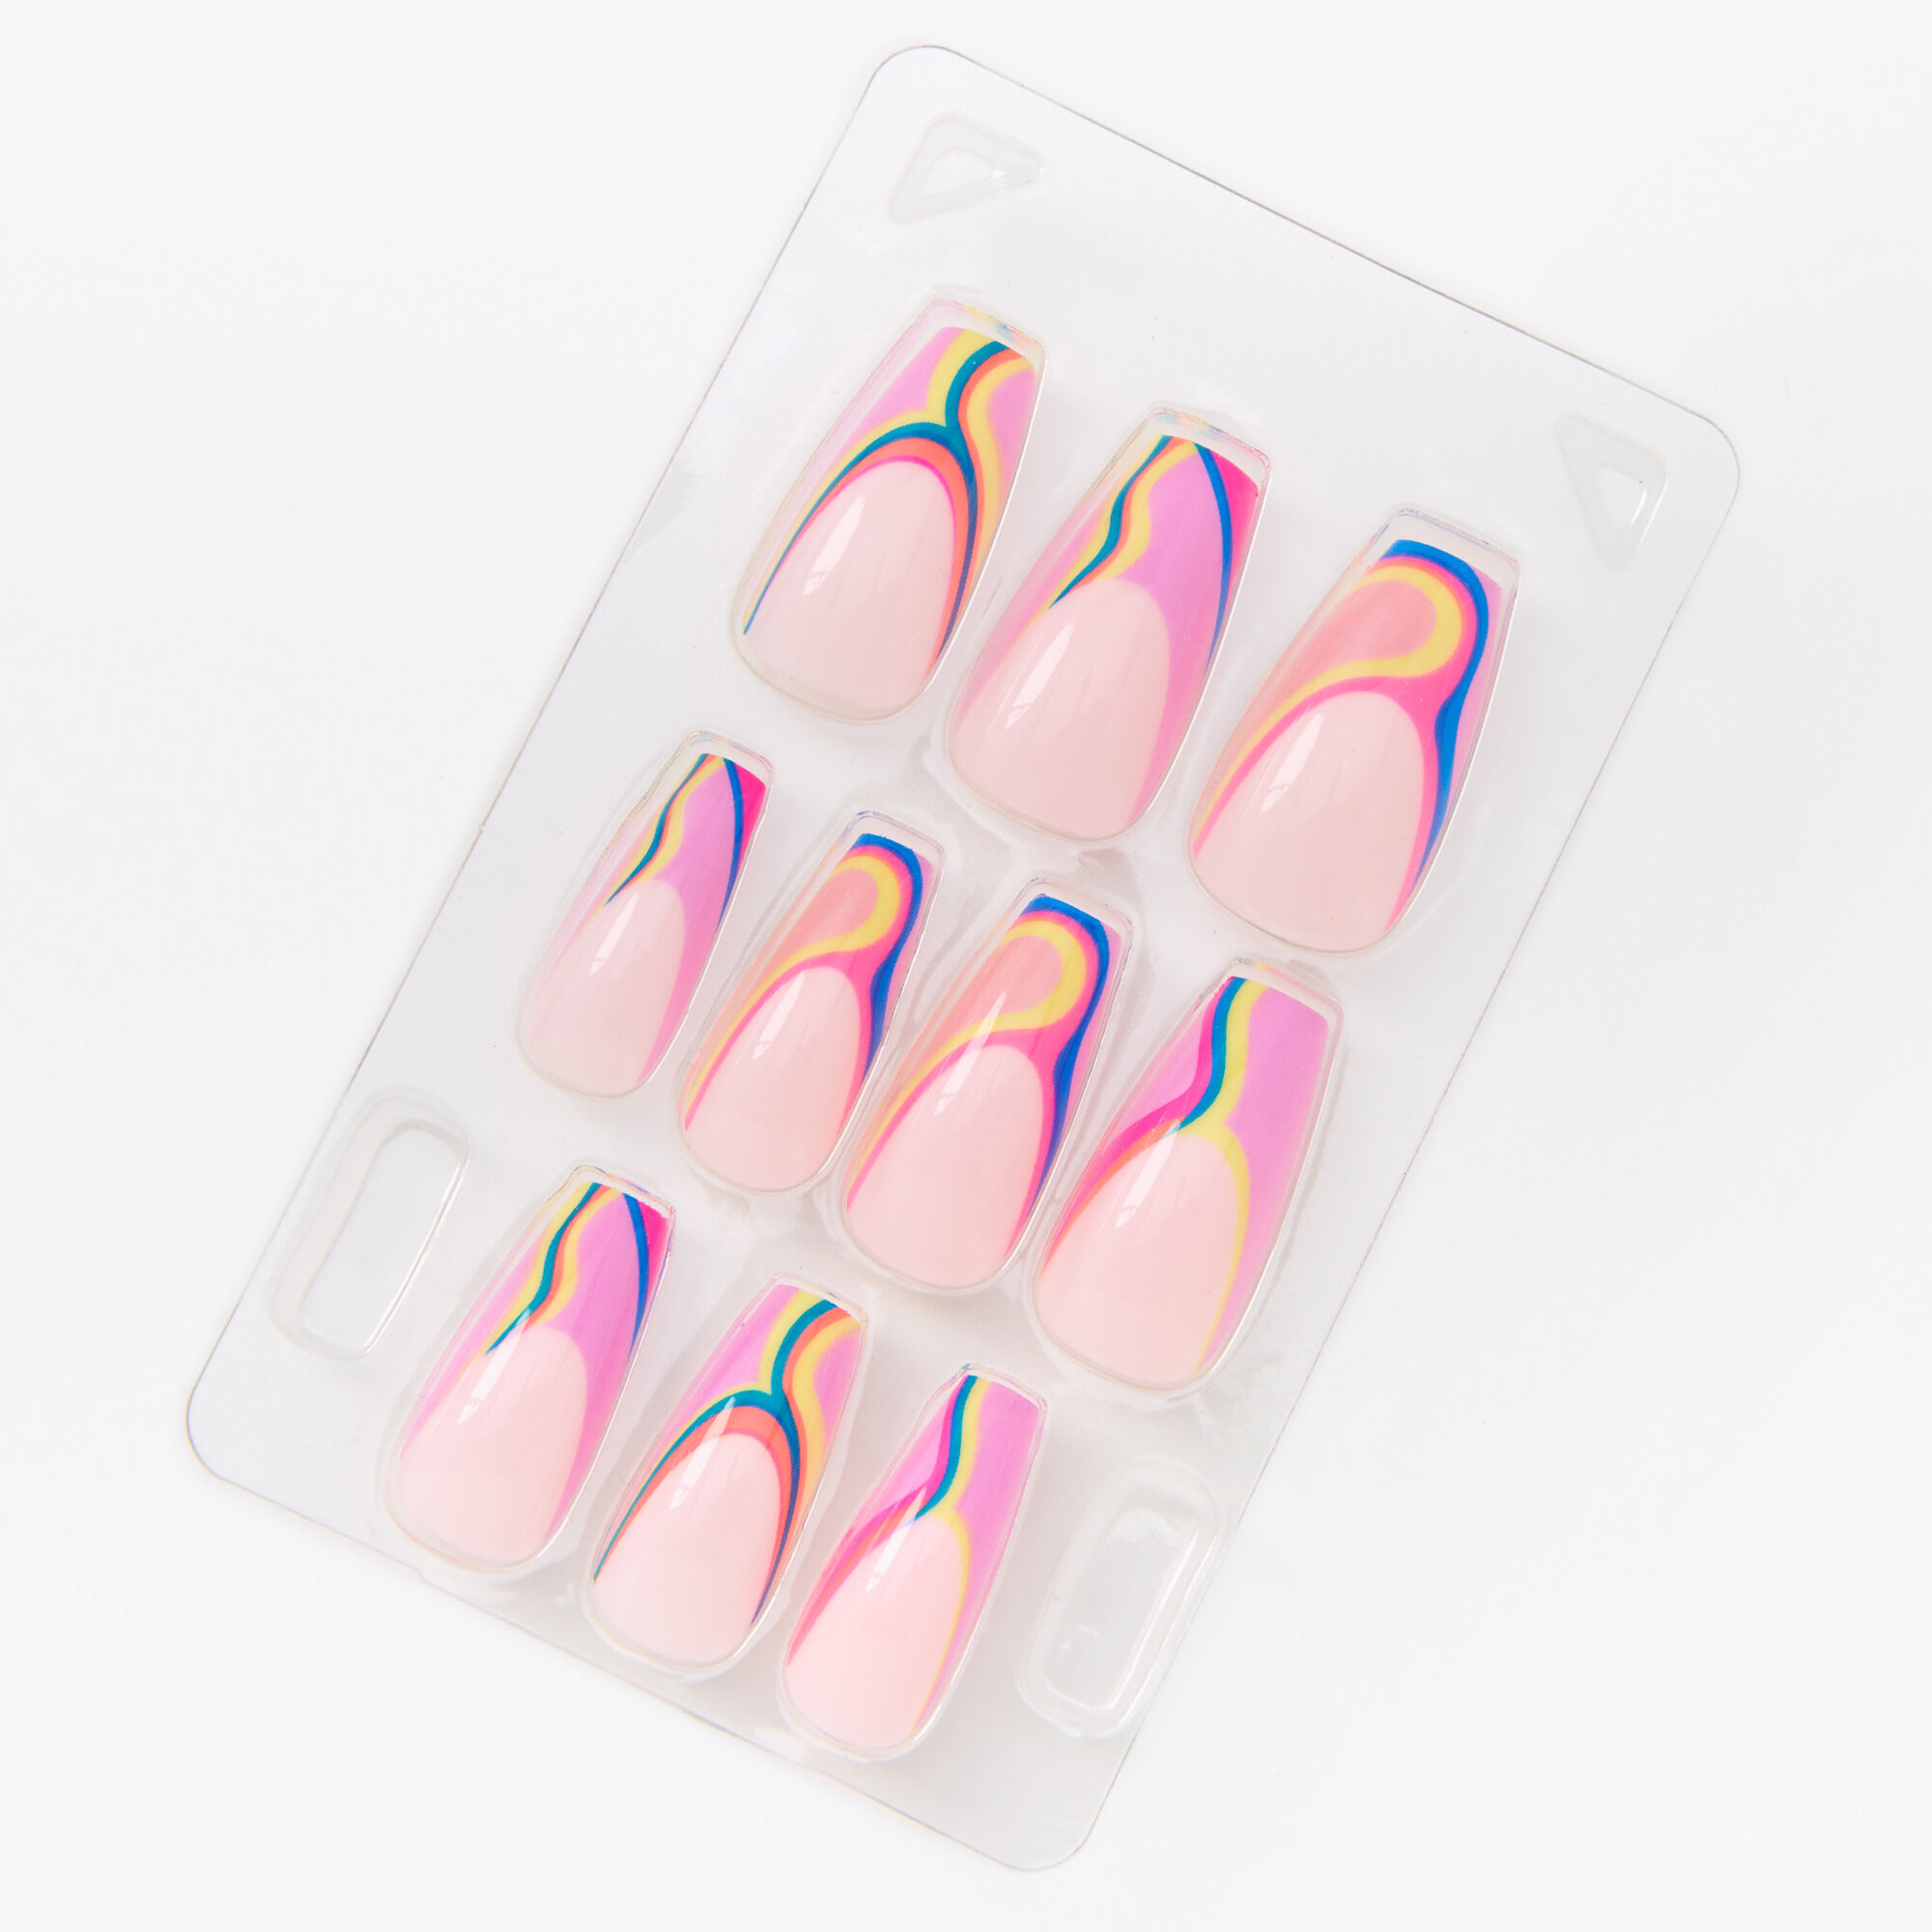 View Claires Marble French Tip Squareletto Press On Vegan Faux Nail Set 24 Pack Pink information